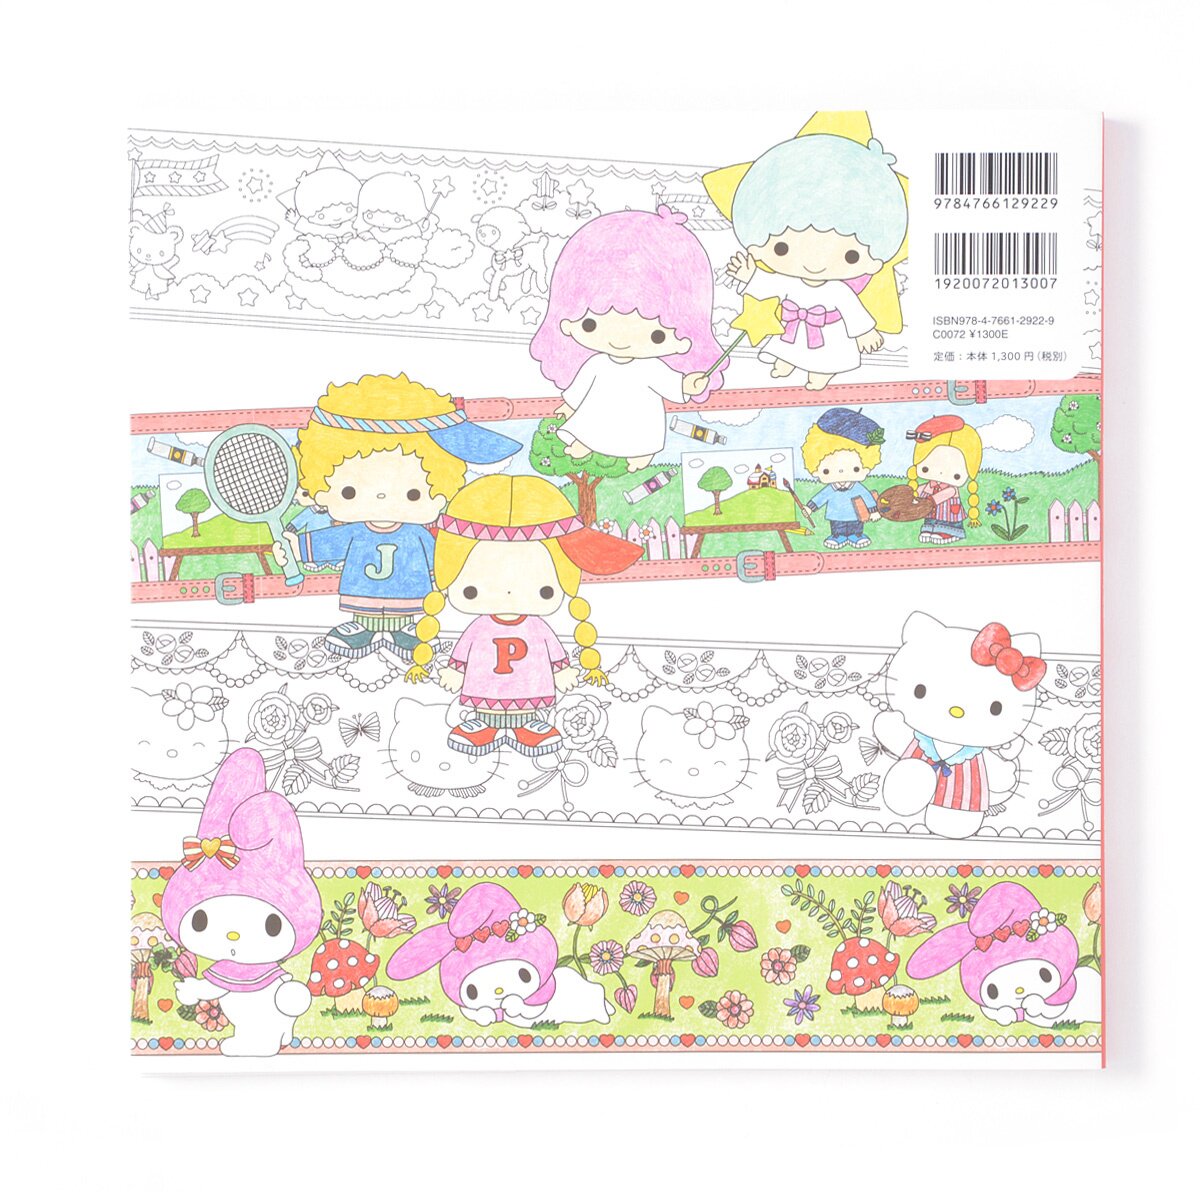 Sanrio Character Coloring Book: Smile!